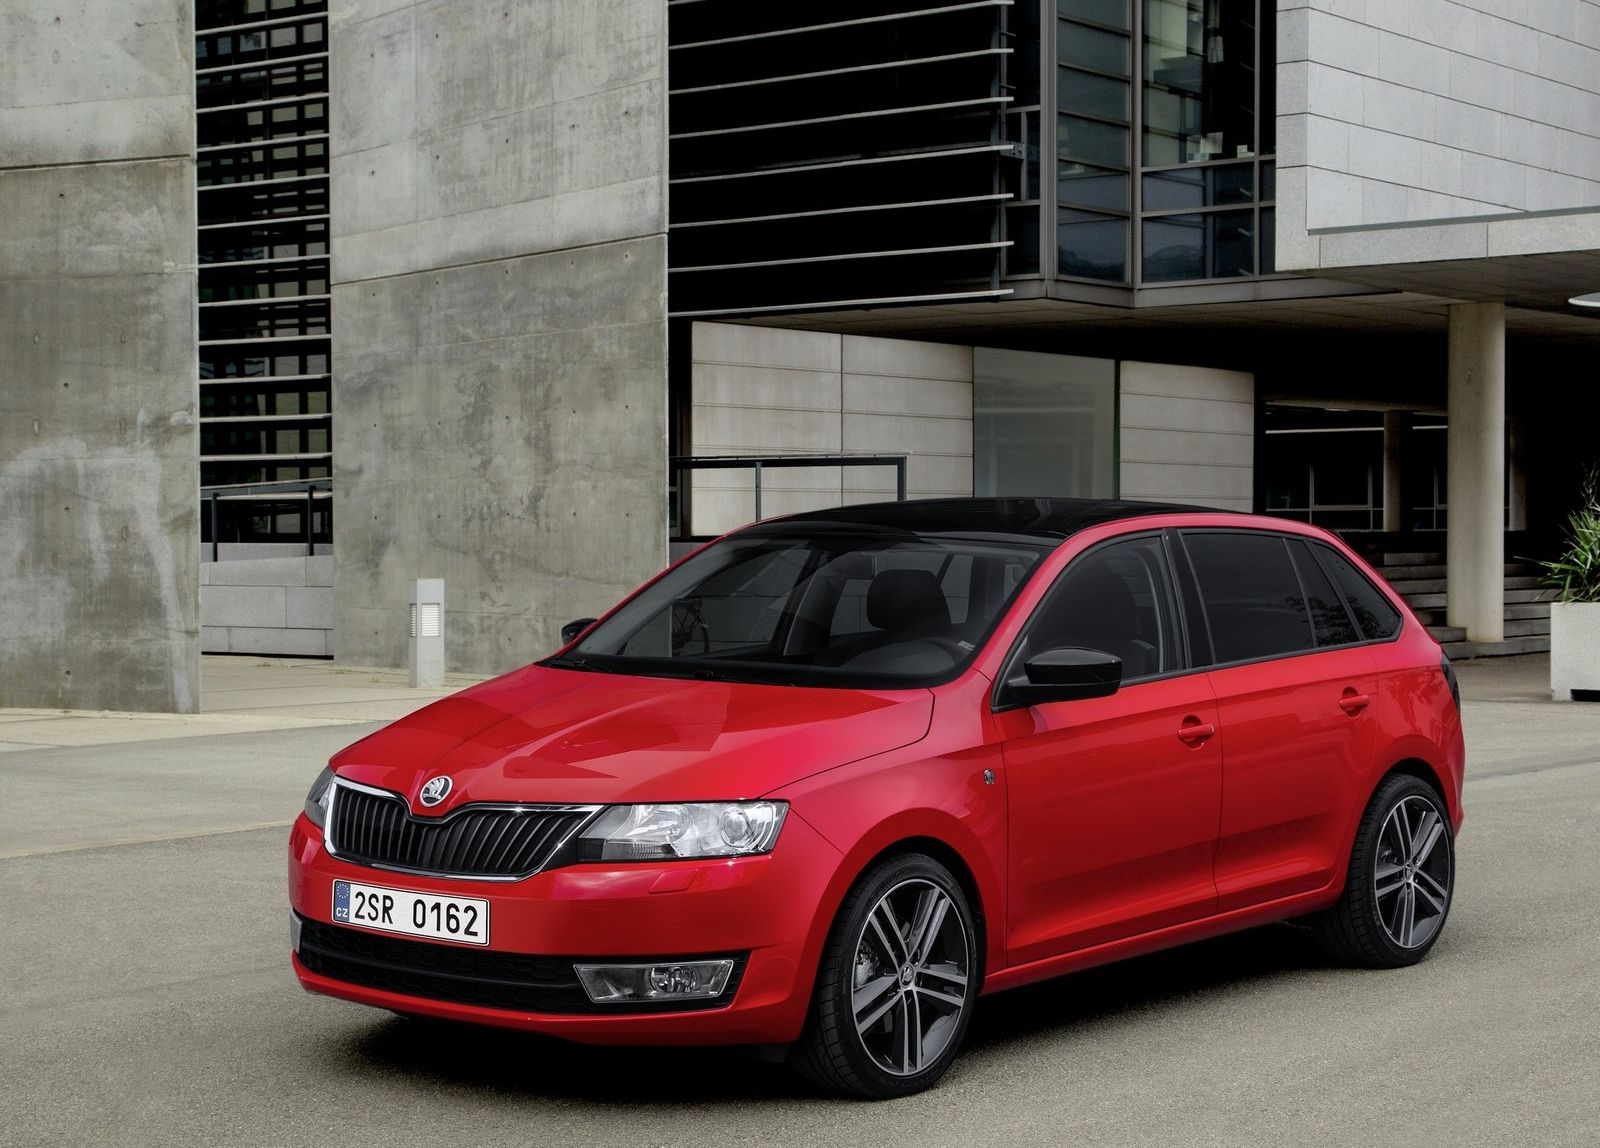 Skoda aims Rapid Spaceback at young buyers